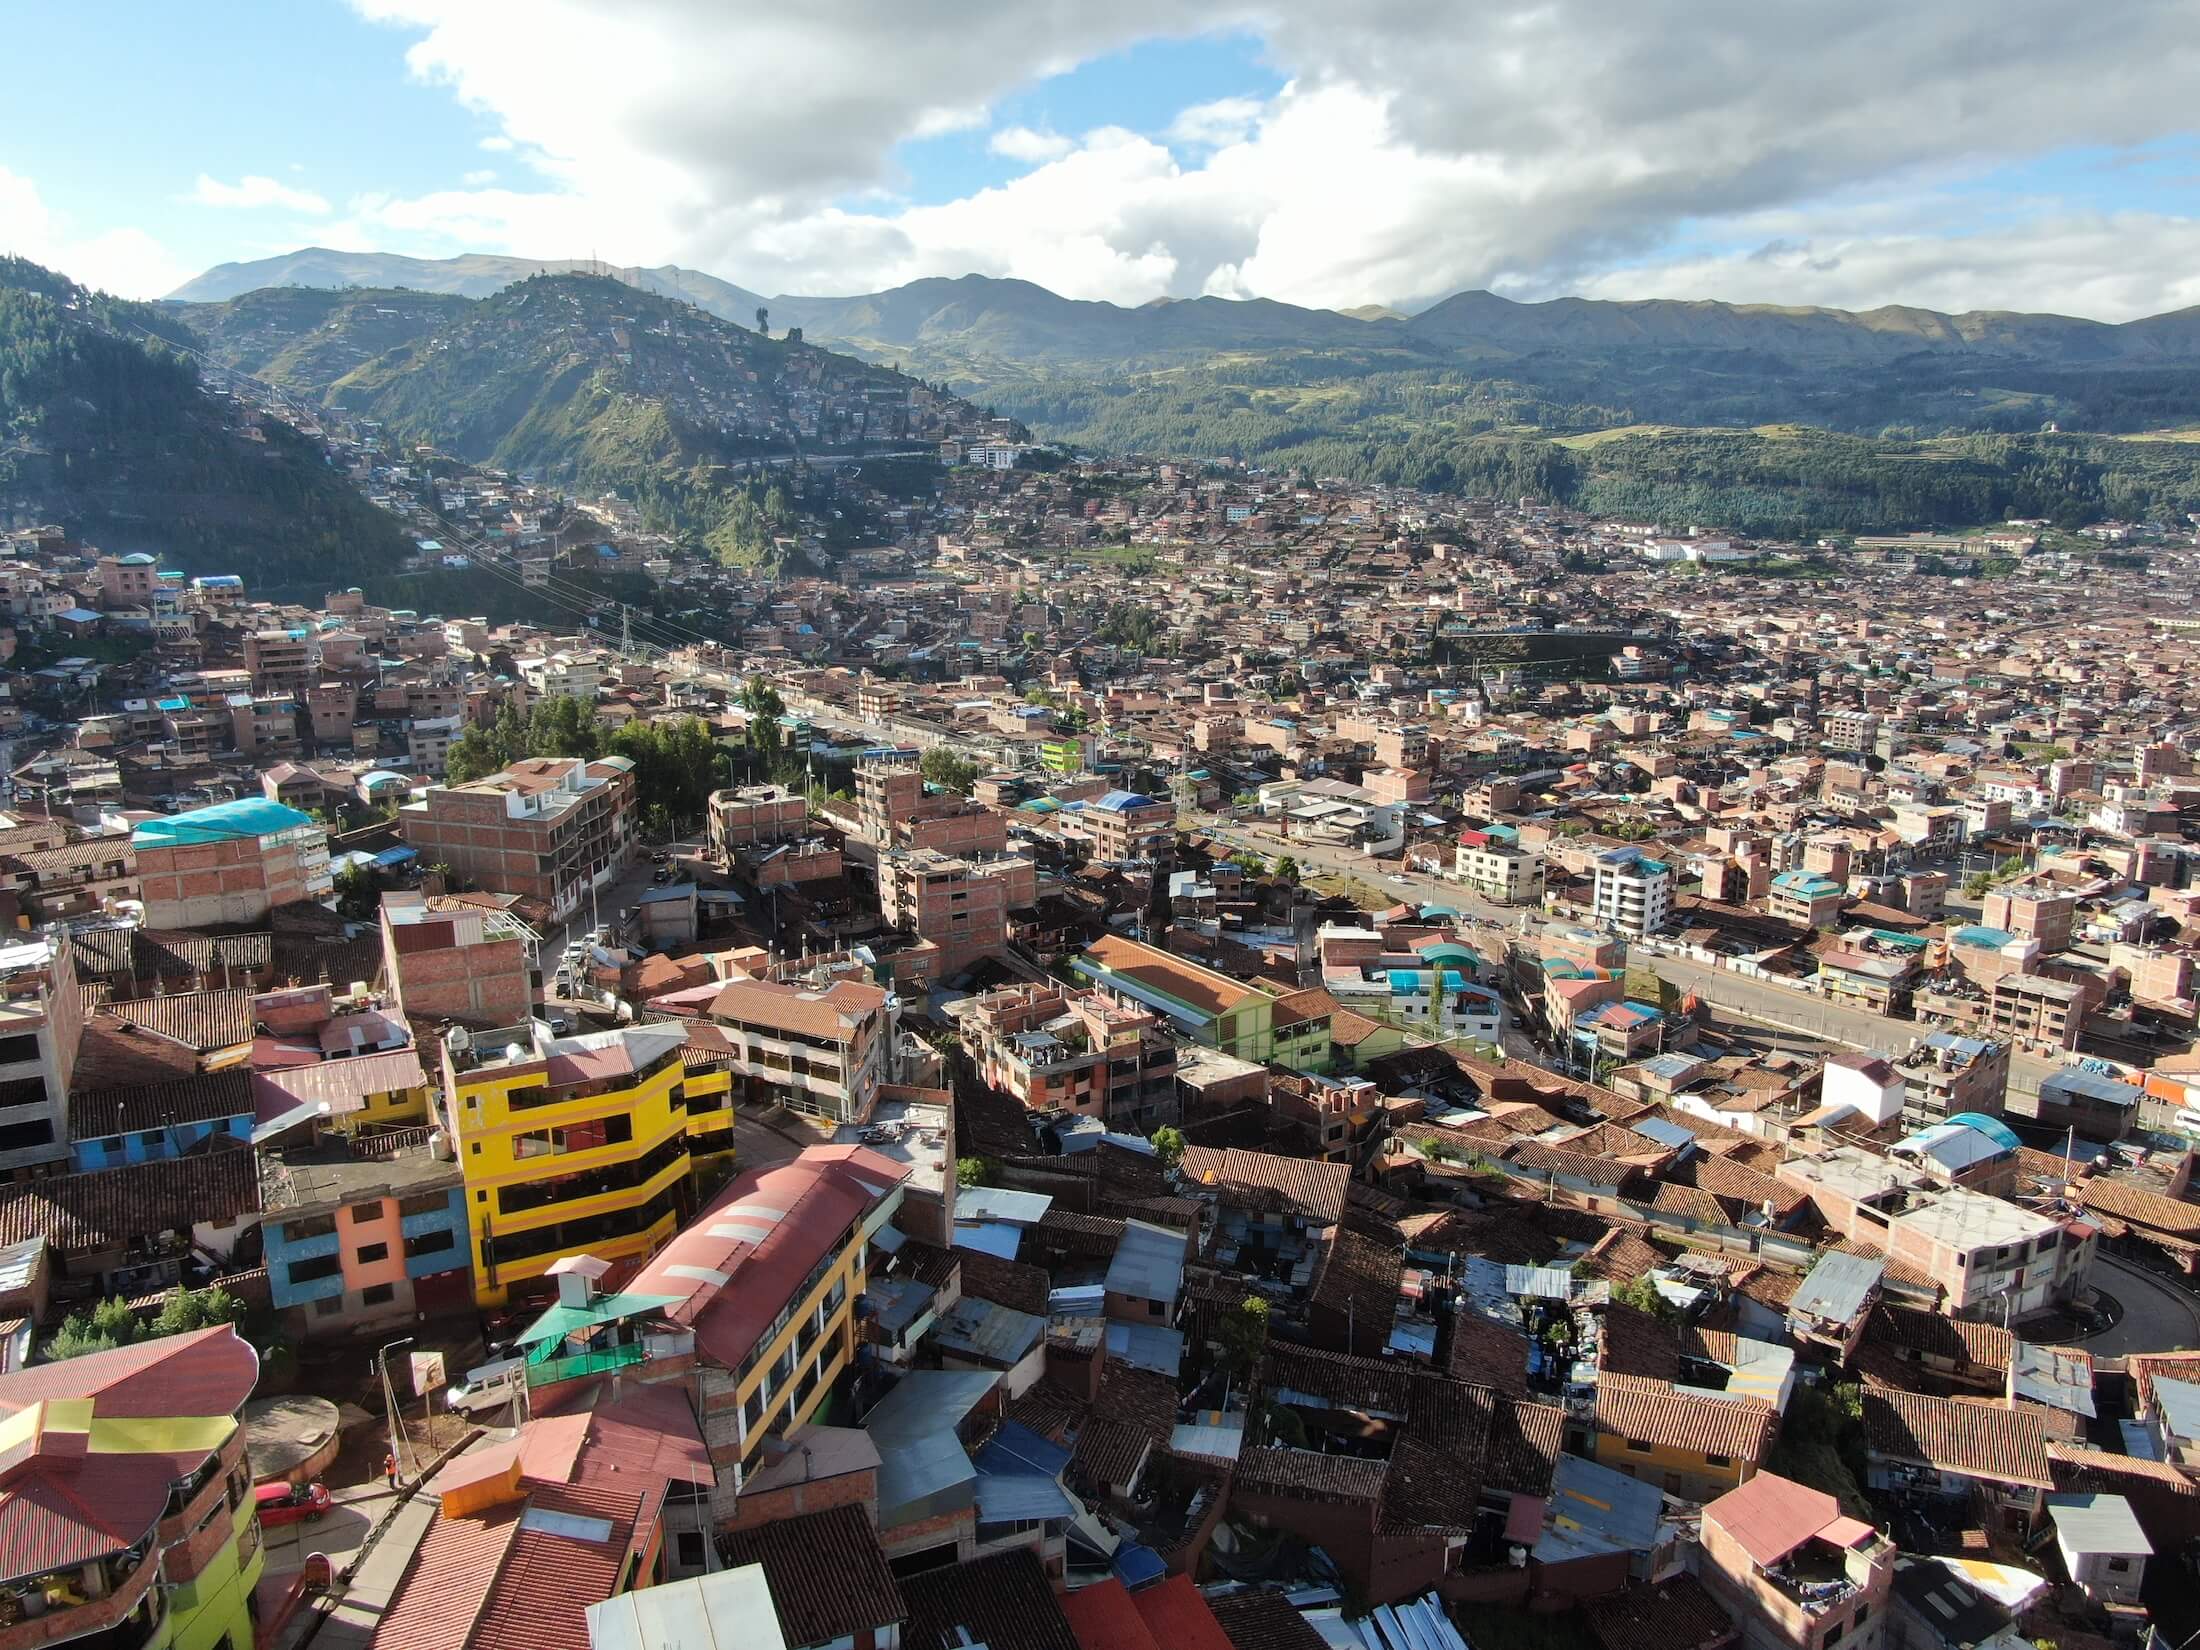 Cusco has beautiful ancient culture, and modern meals of gorgeous food.